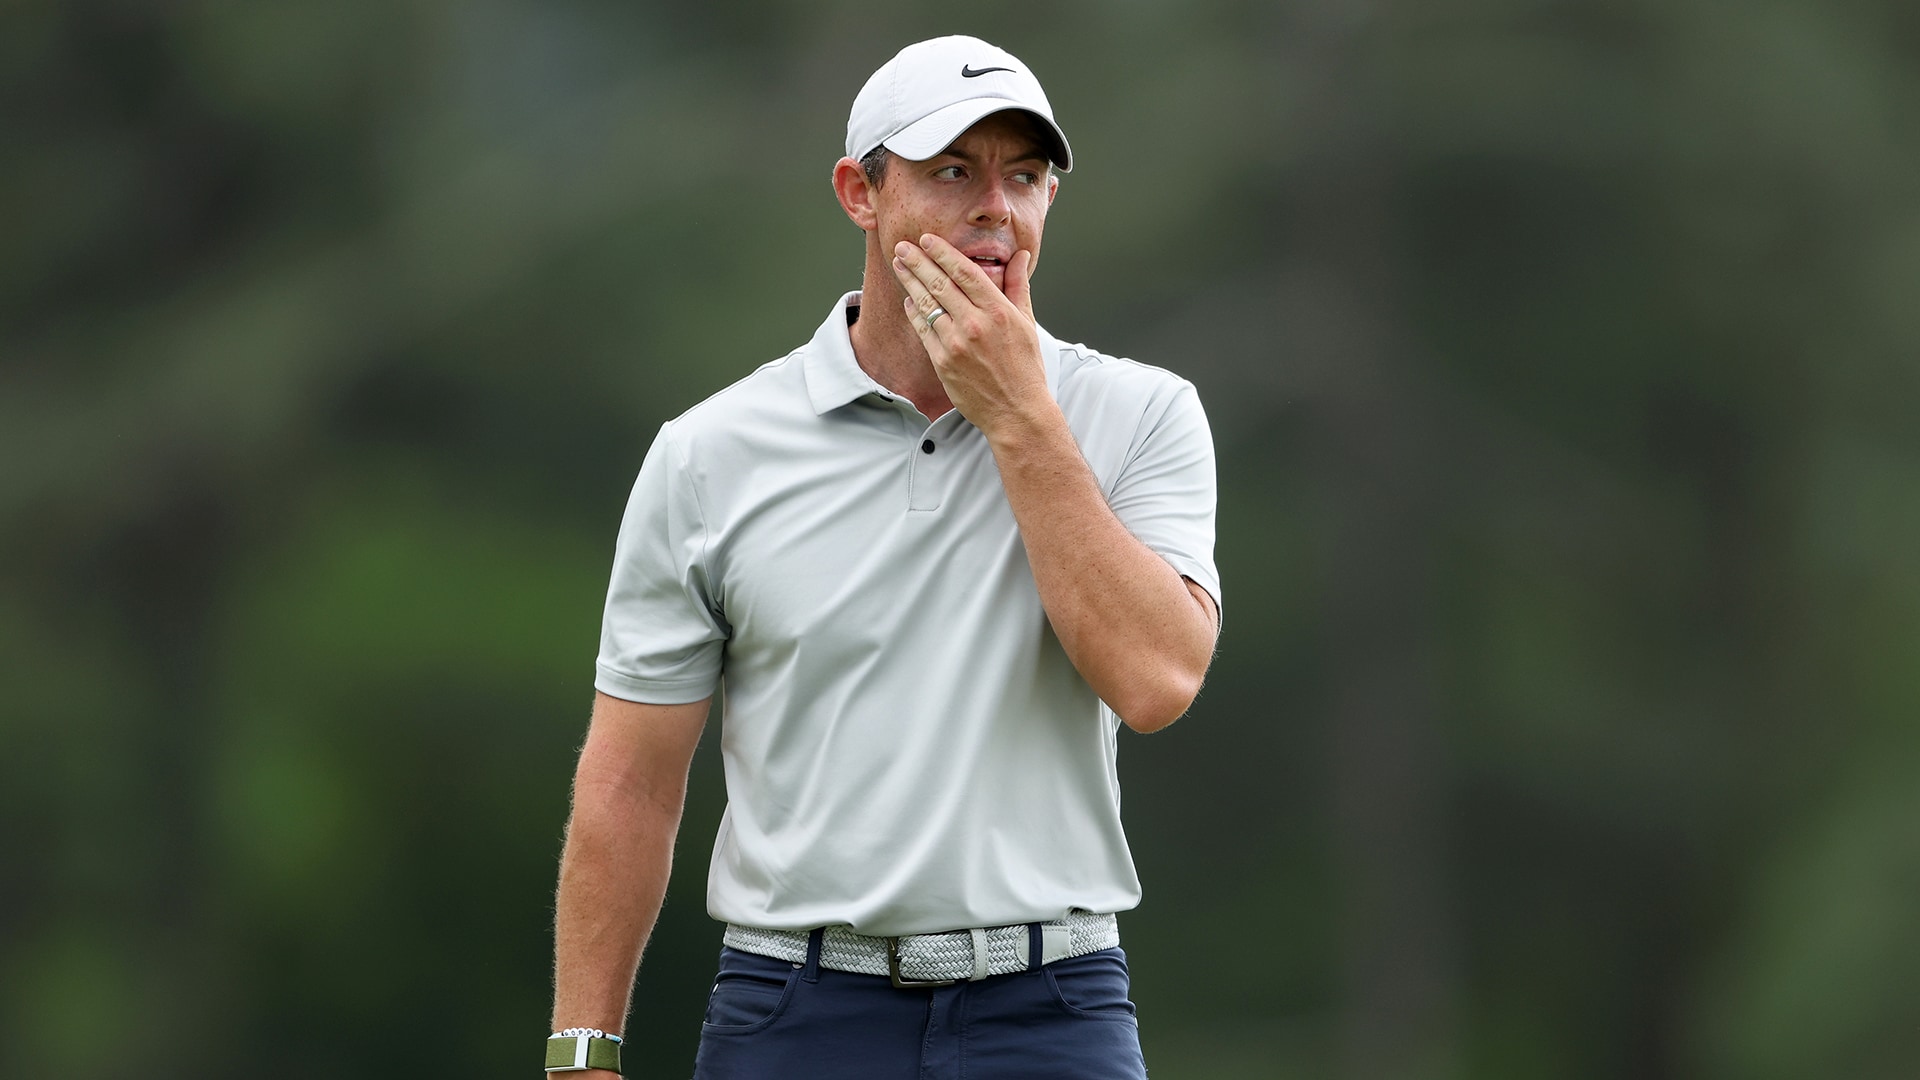 Wells Fargo: After skipping Heritage for ‘private matter,’ Rory McIlroy returns in ‘better headspace’